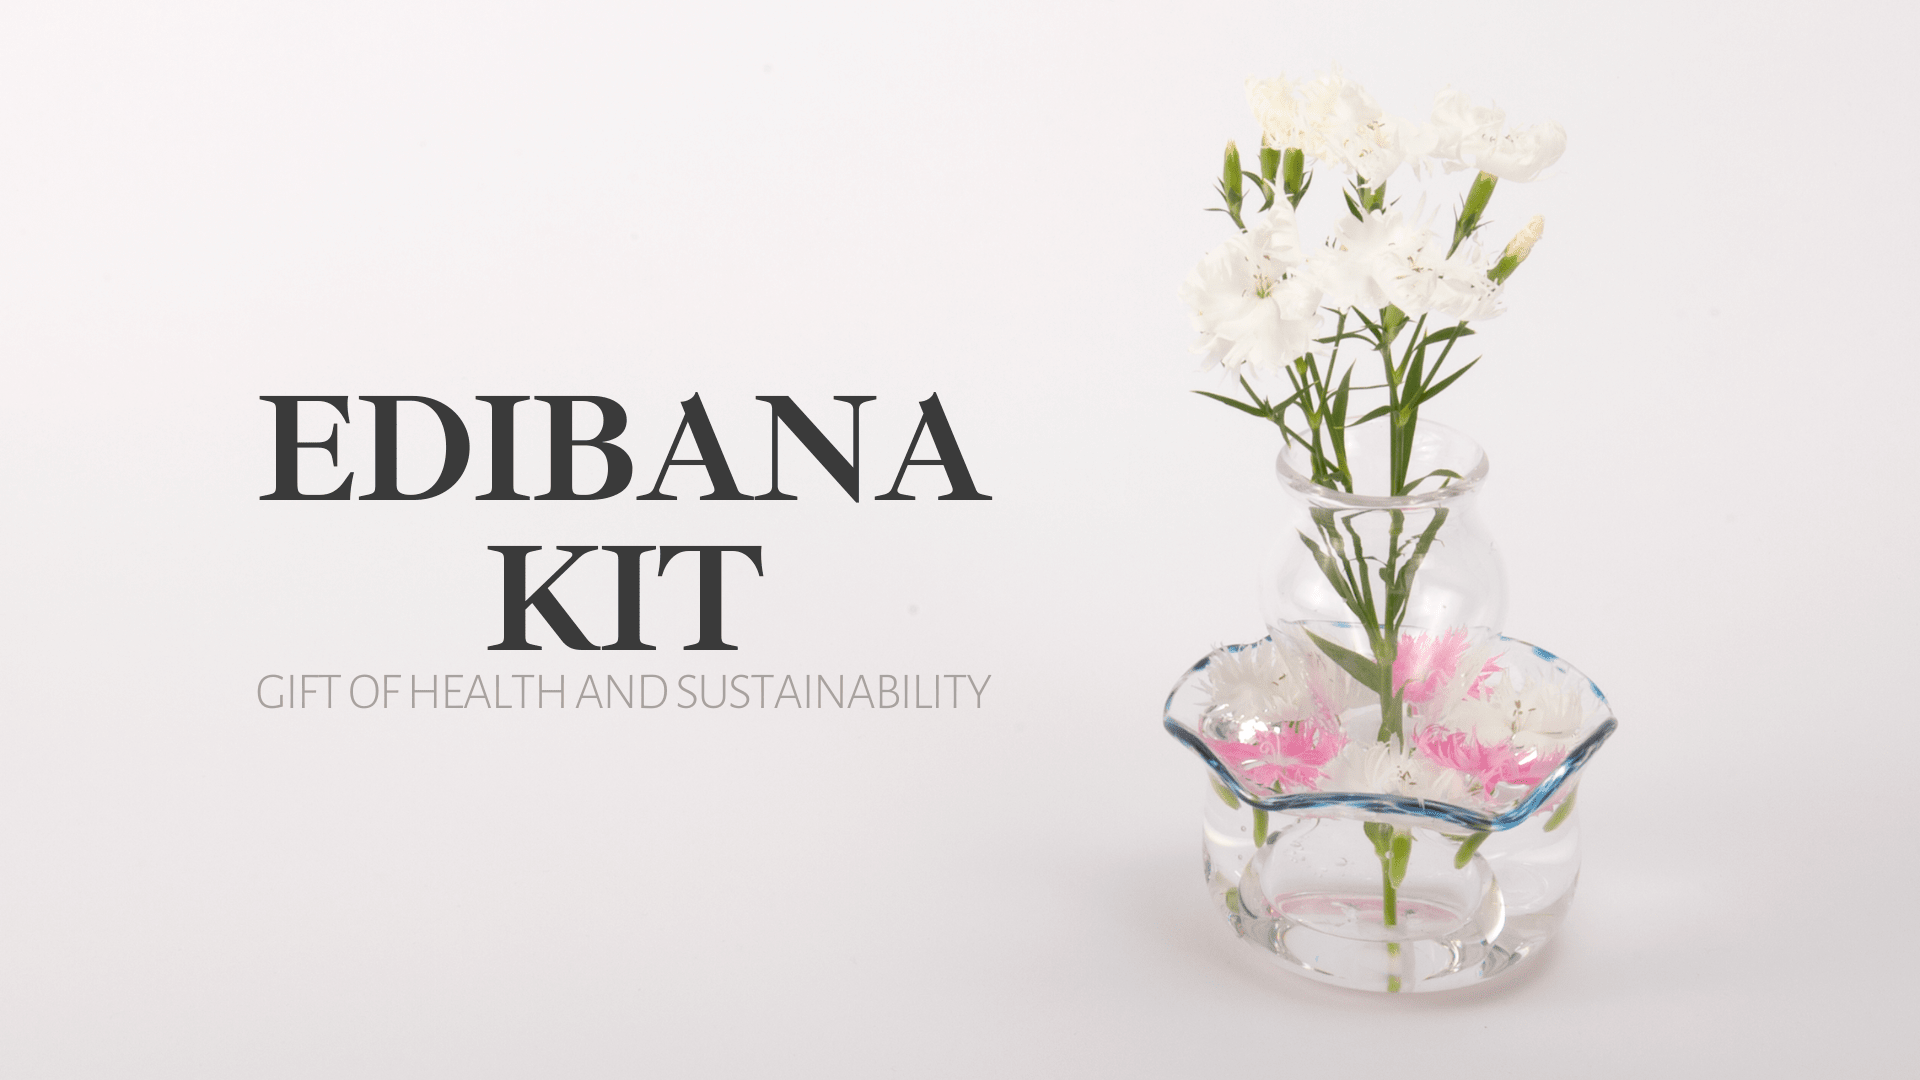 Image with a clear glass vase holding white flowers on the right-hand side, and large text reading ‘Edibana Kit. Gift of health and sustainability’ on the left.